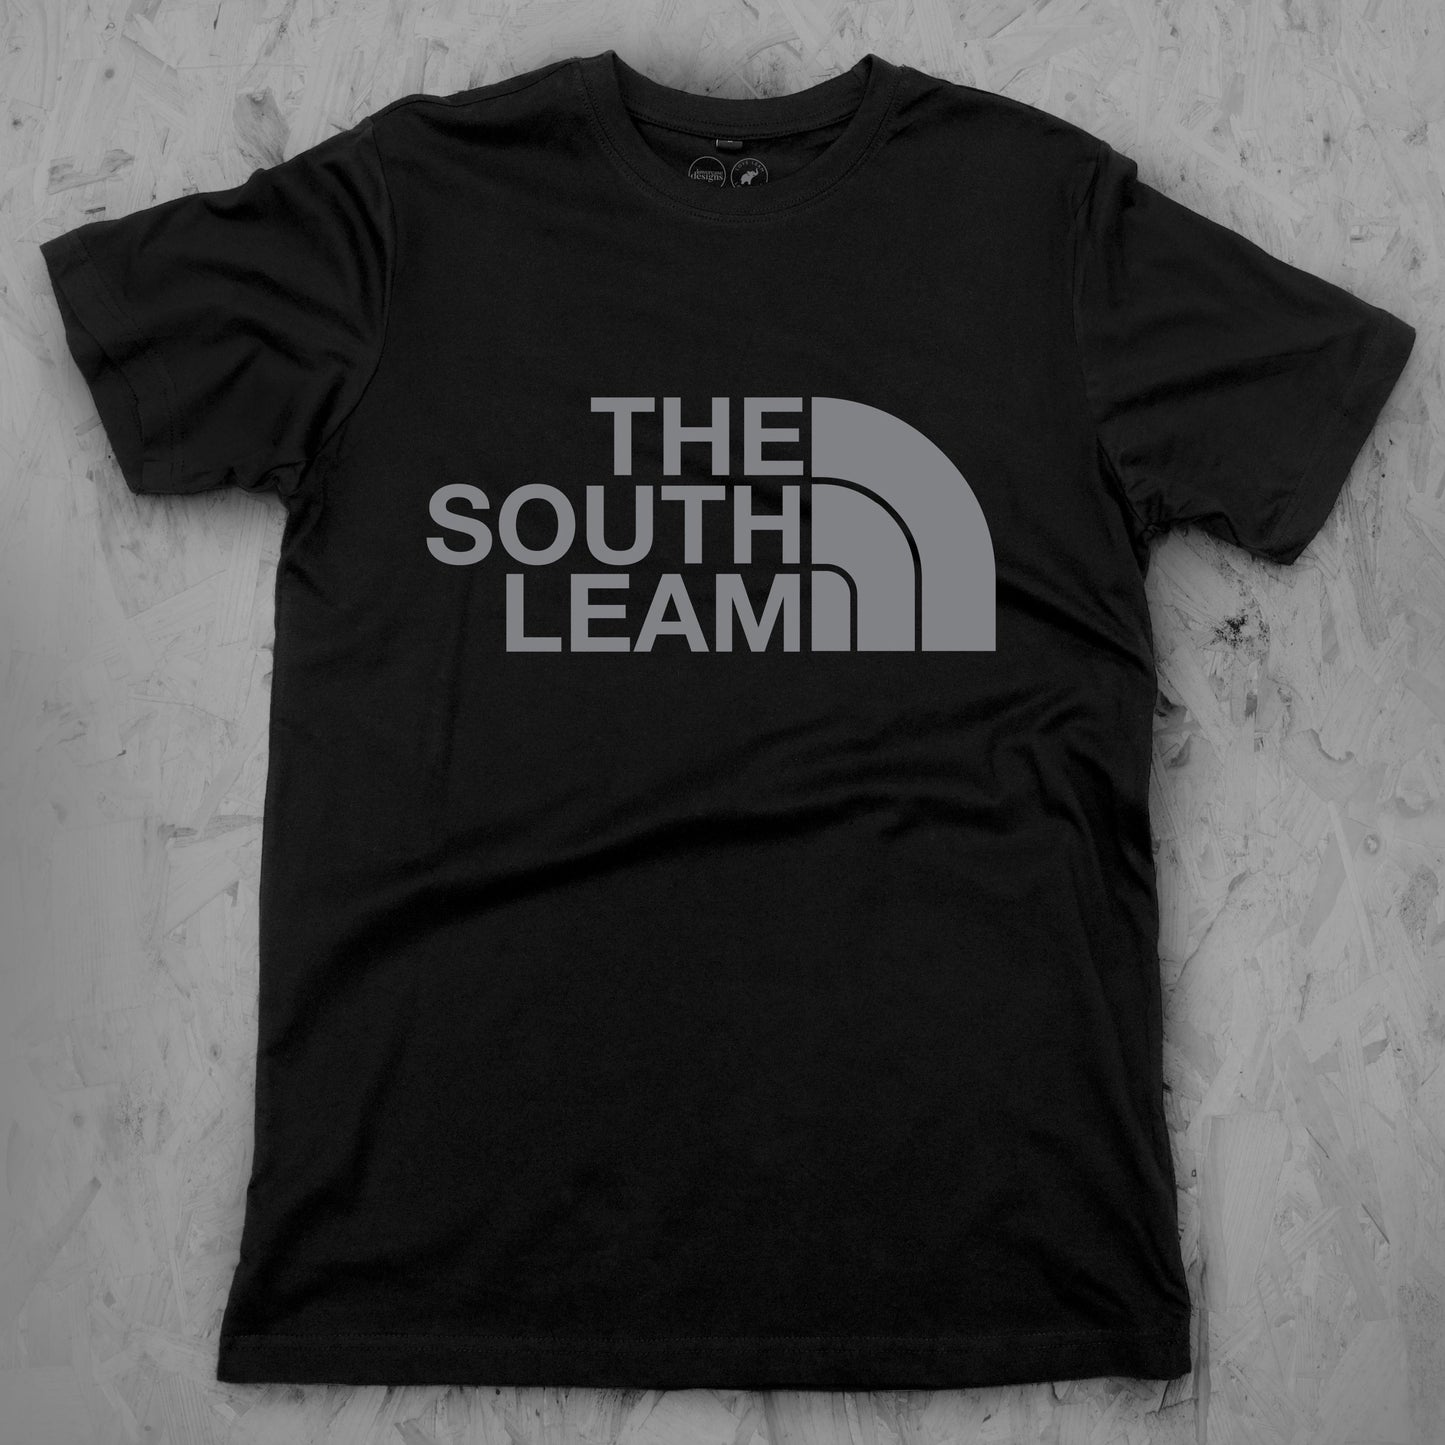 The South Leam Tee Child's sizes 3-14 years